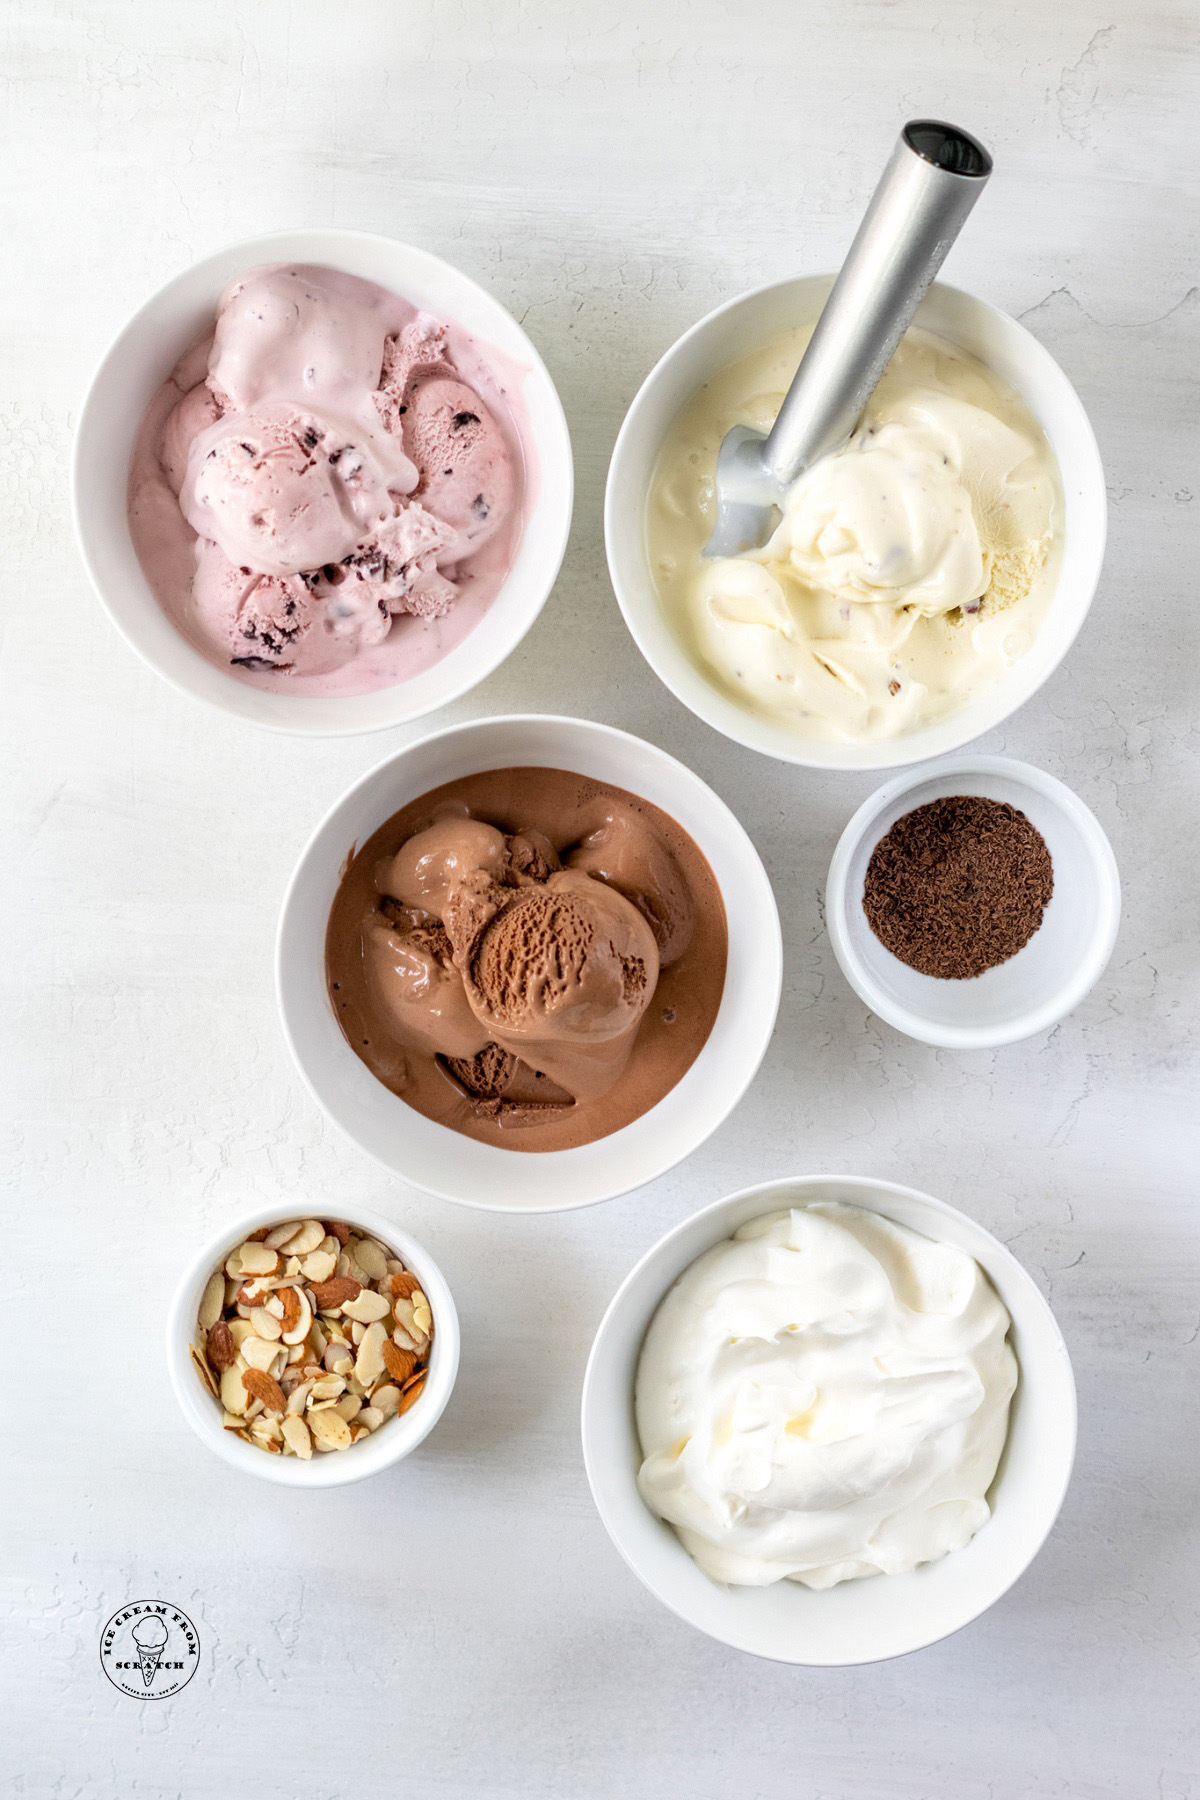 The ingredients needed to make spumoni, including softened ice cream, slivered almonds, and whipped cream.